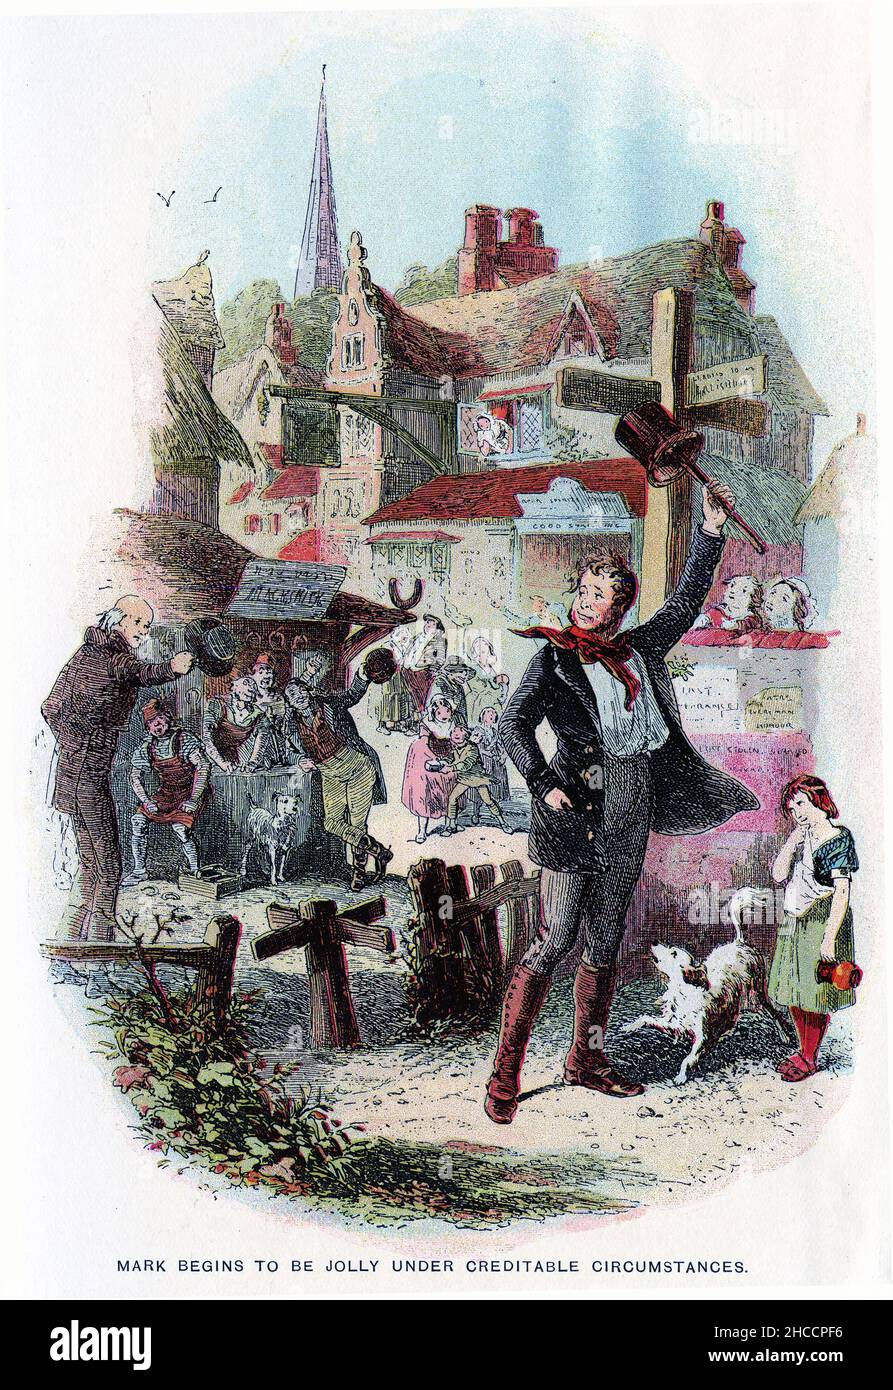 Engraving of Mark being jollyn under creditable circumstances, a scene from a Victorian era book by Charles Dickens, published circa 1908 Stock Photo